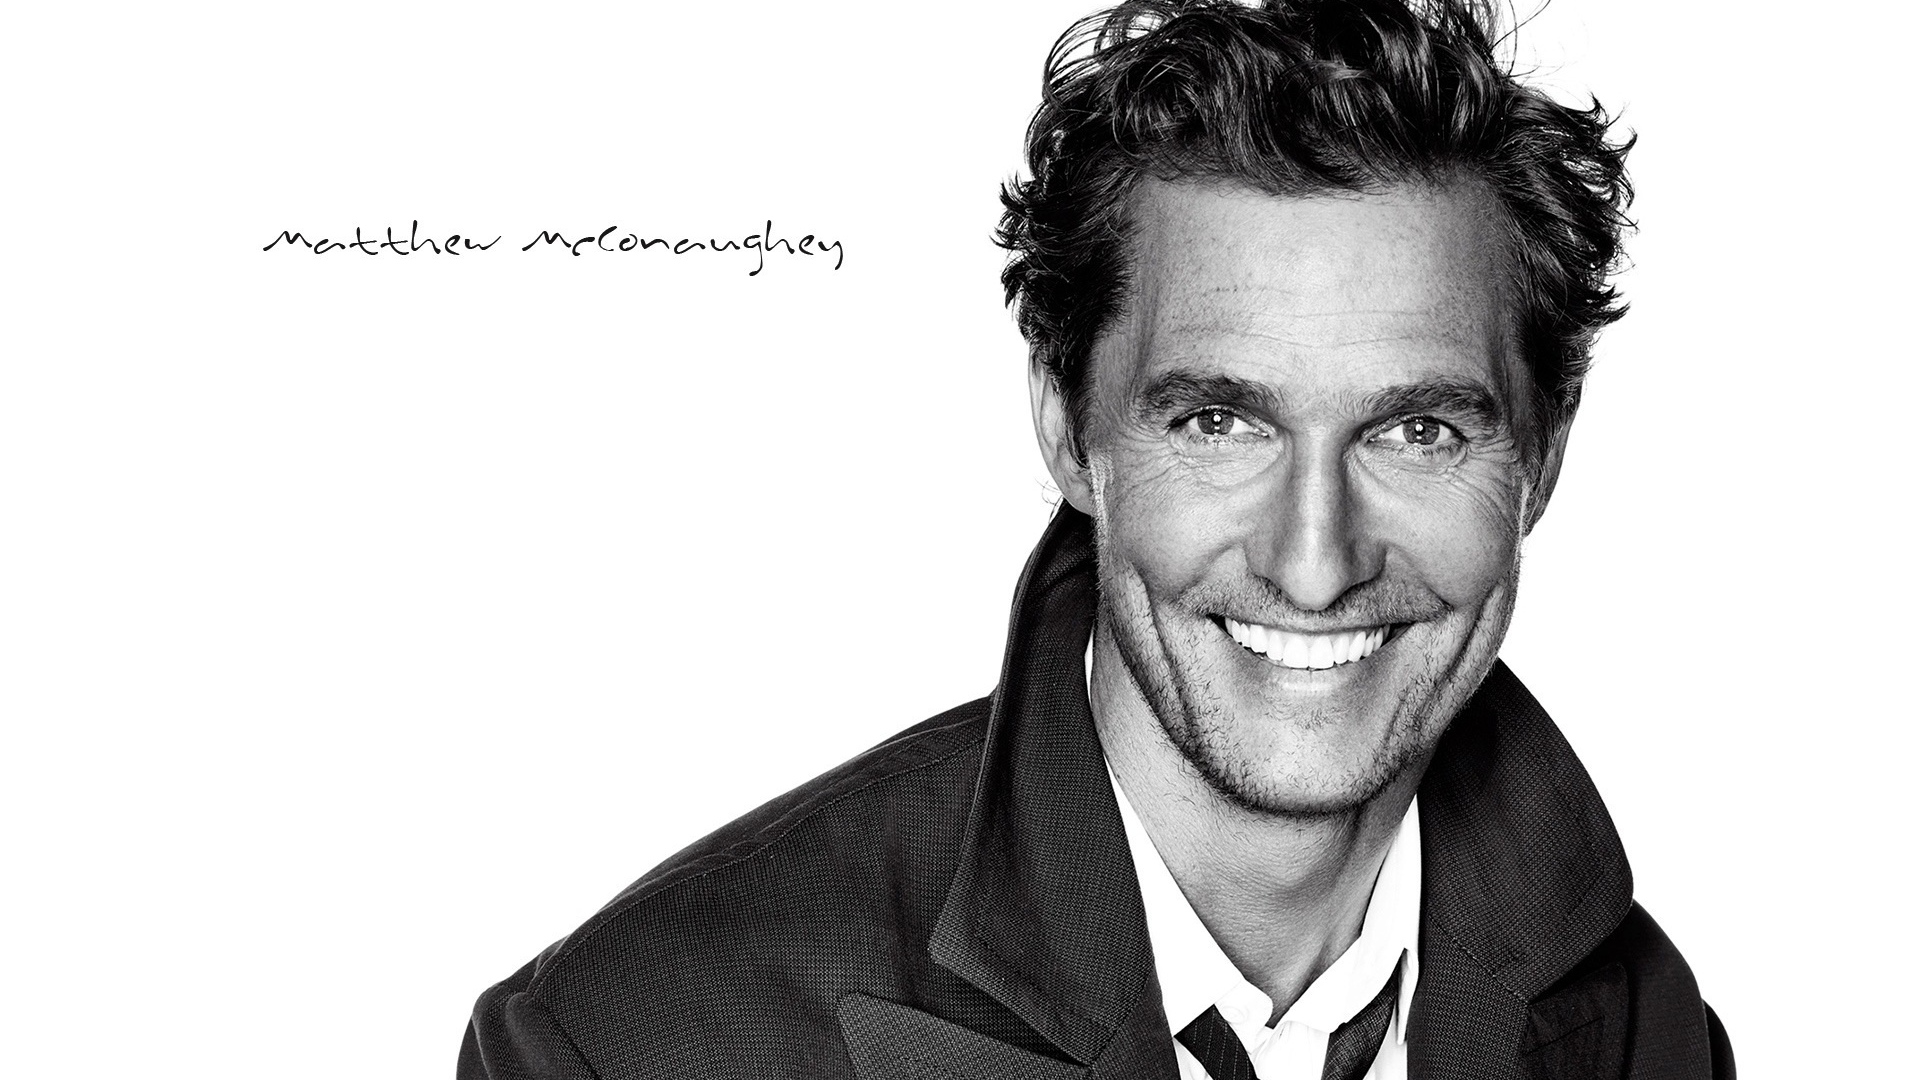 matthew mcconaughey wallpaper,facial expression,forehead,chin,smile,black and white